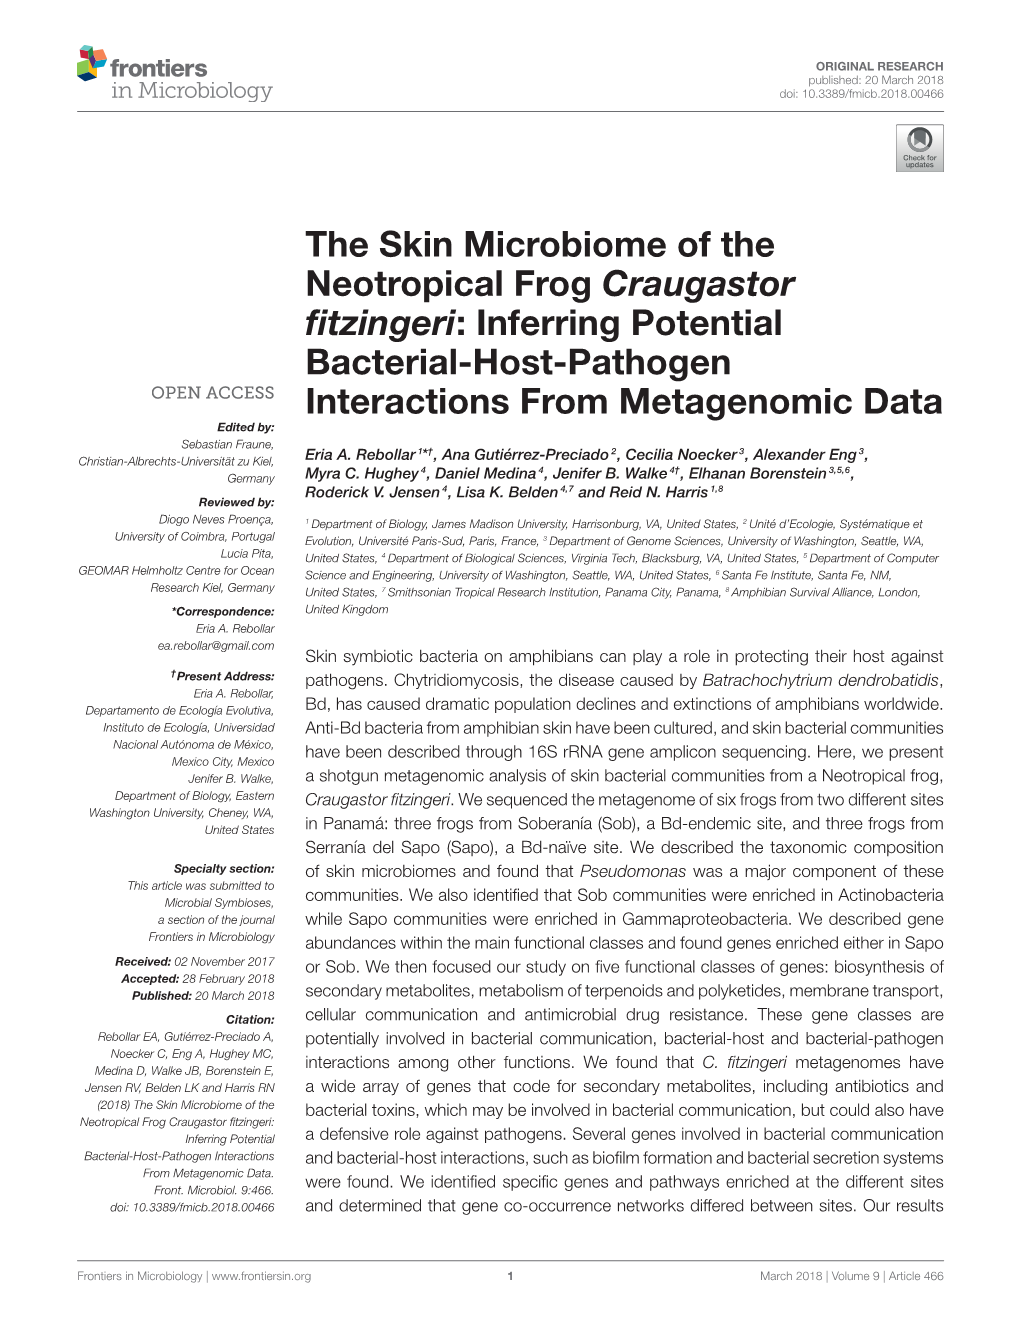 The Skin Microbiome of the Neotropical Frog Craugastor Fitzingeri